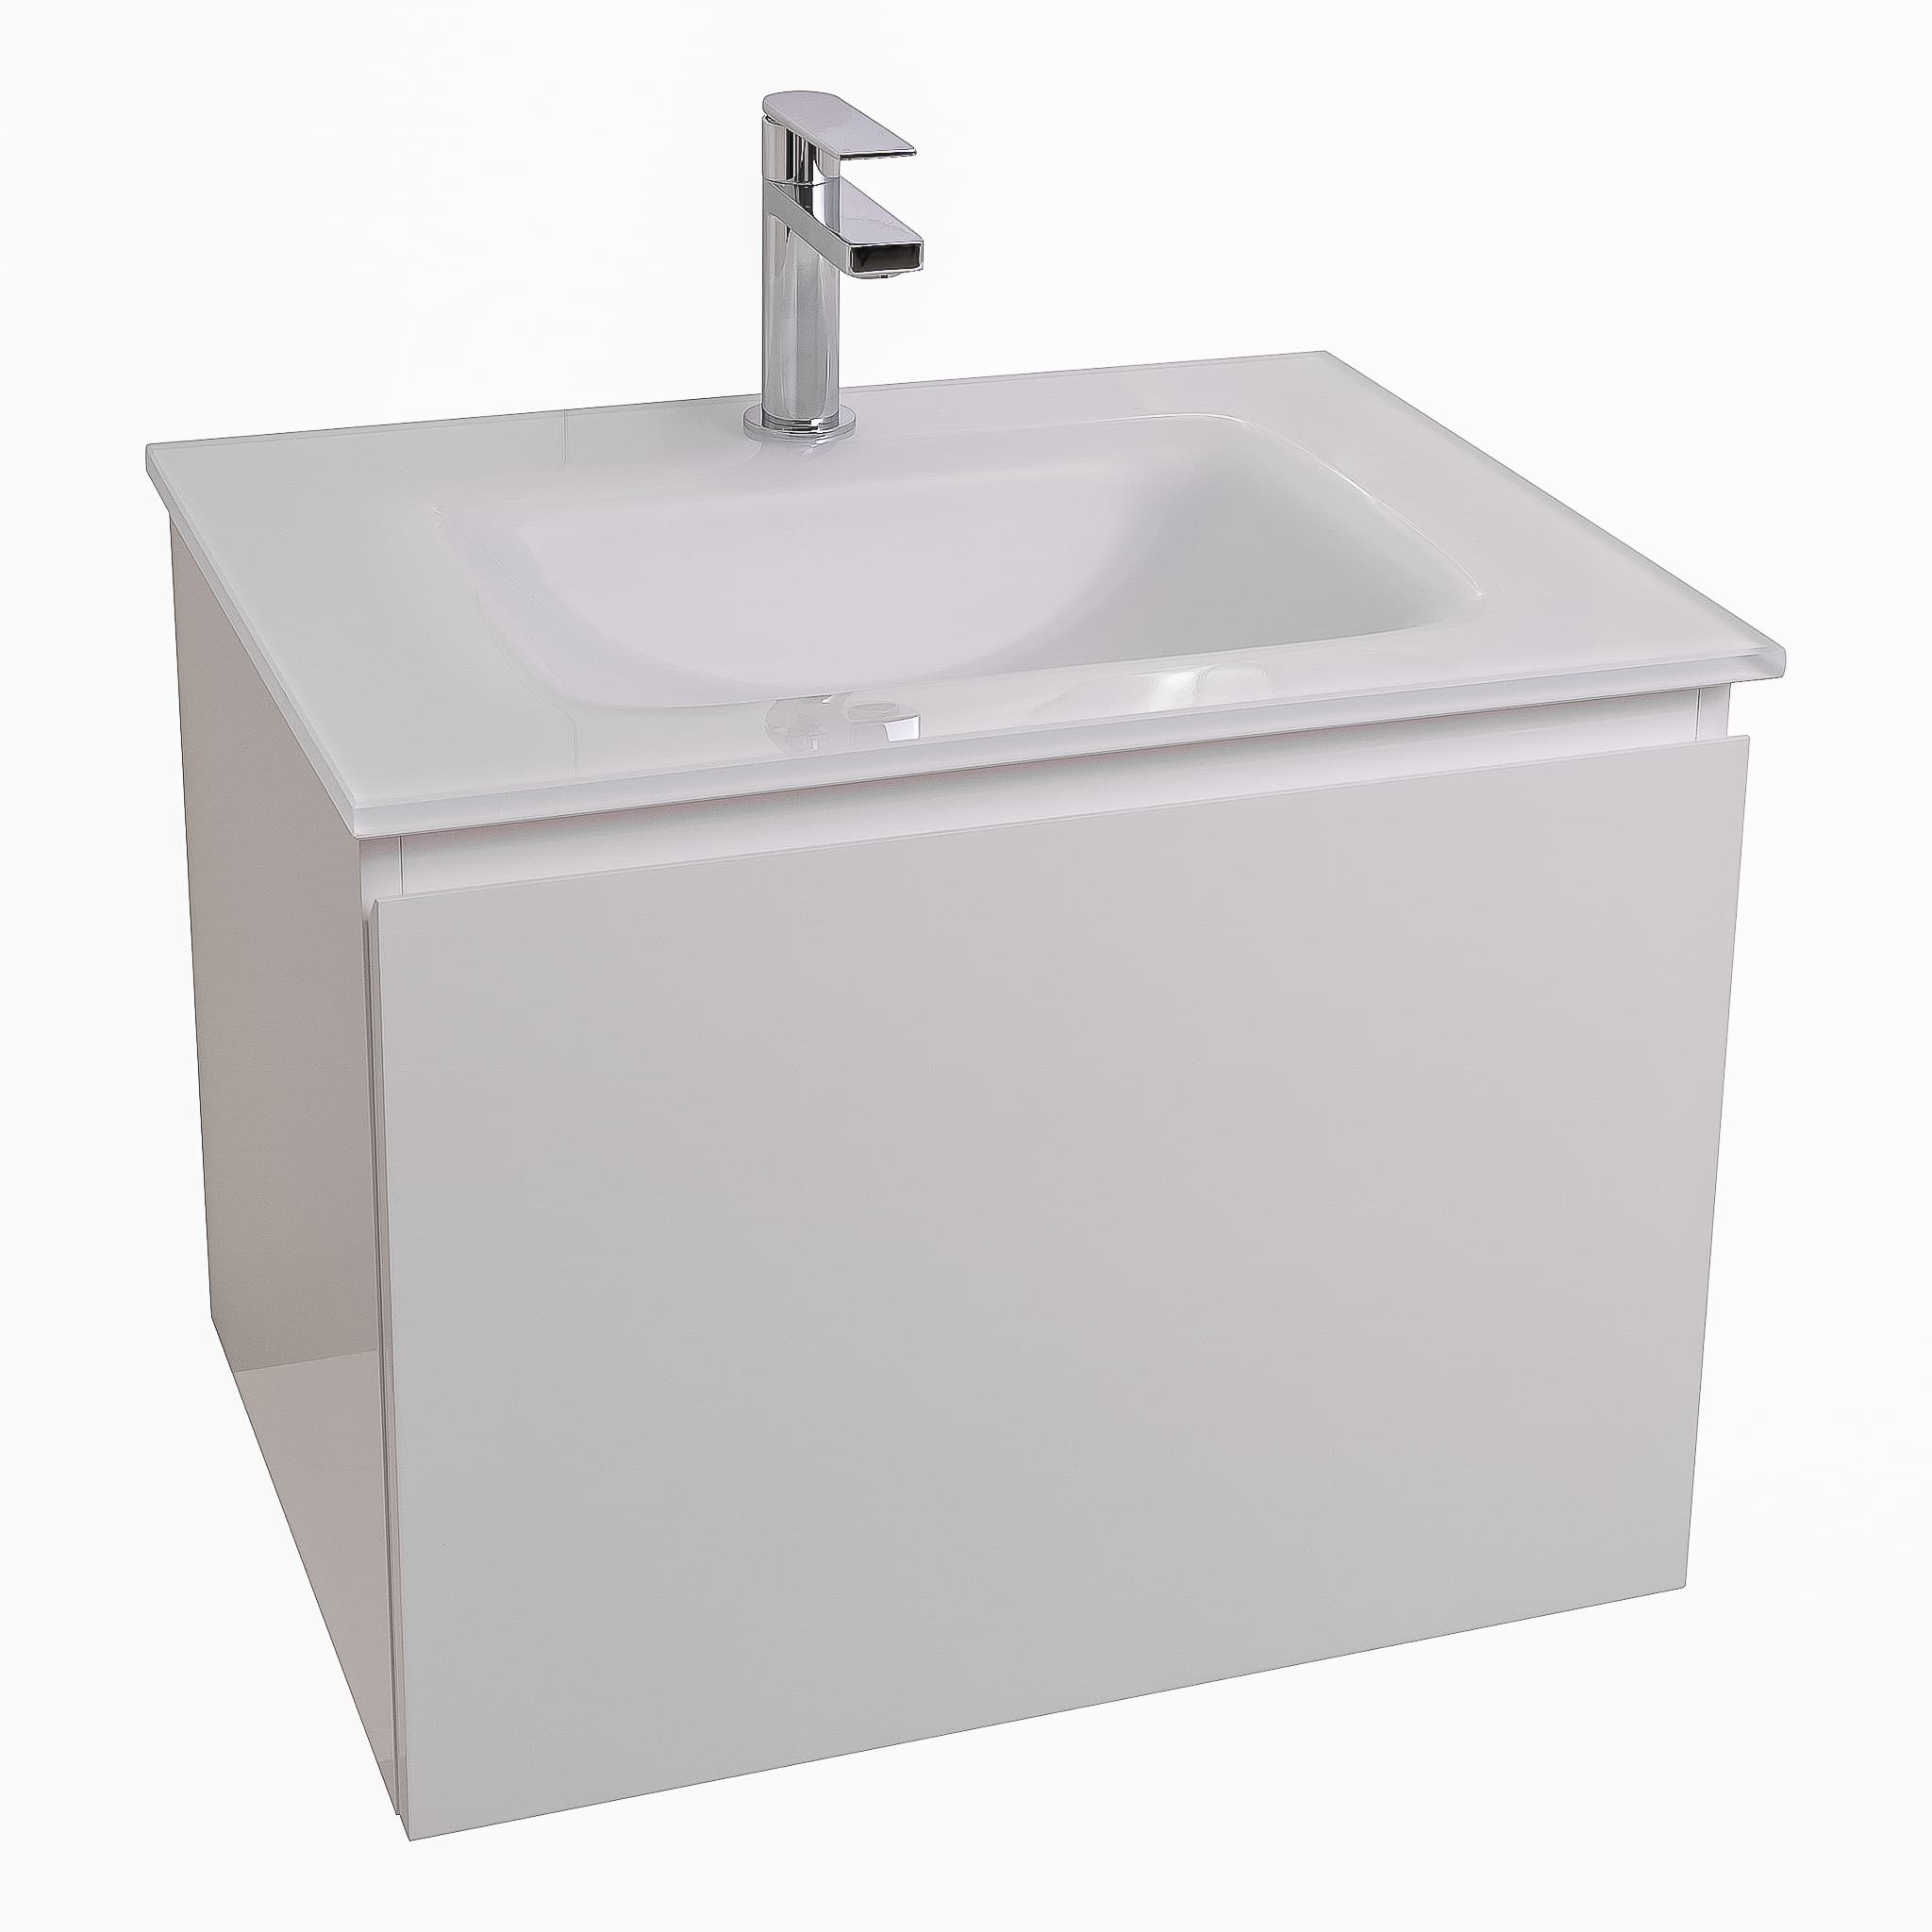 Venice 23.5 White High Gloss Cabinet, White Tempered Glass Sink, Wall Mounted Modern Vanity Set